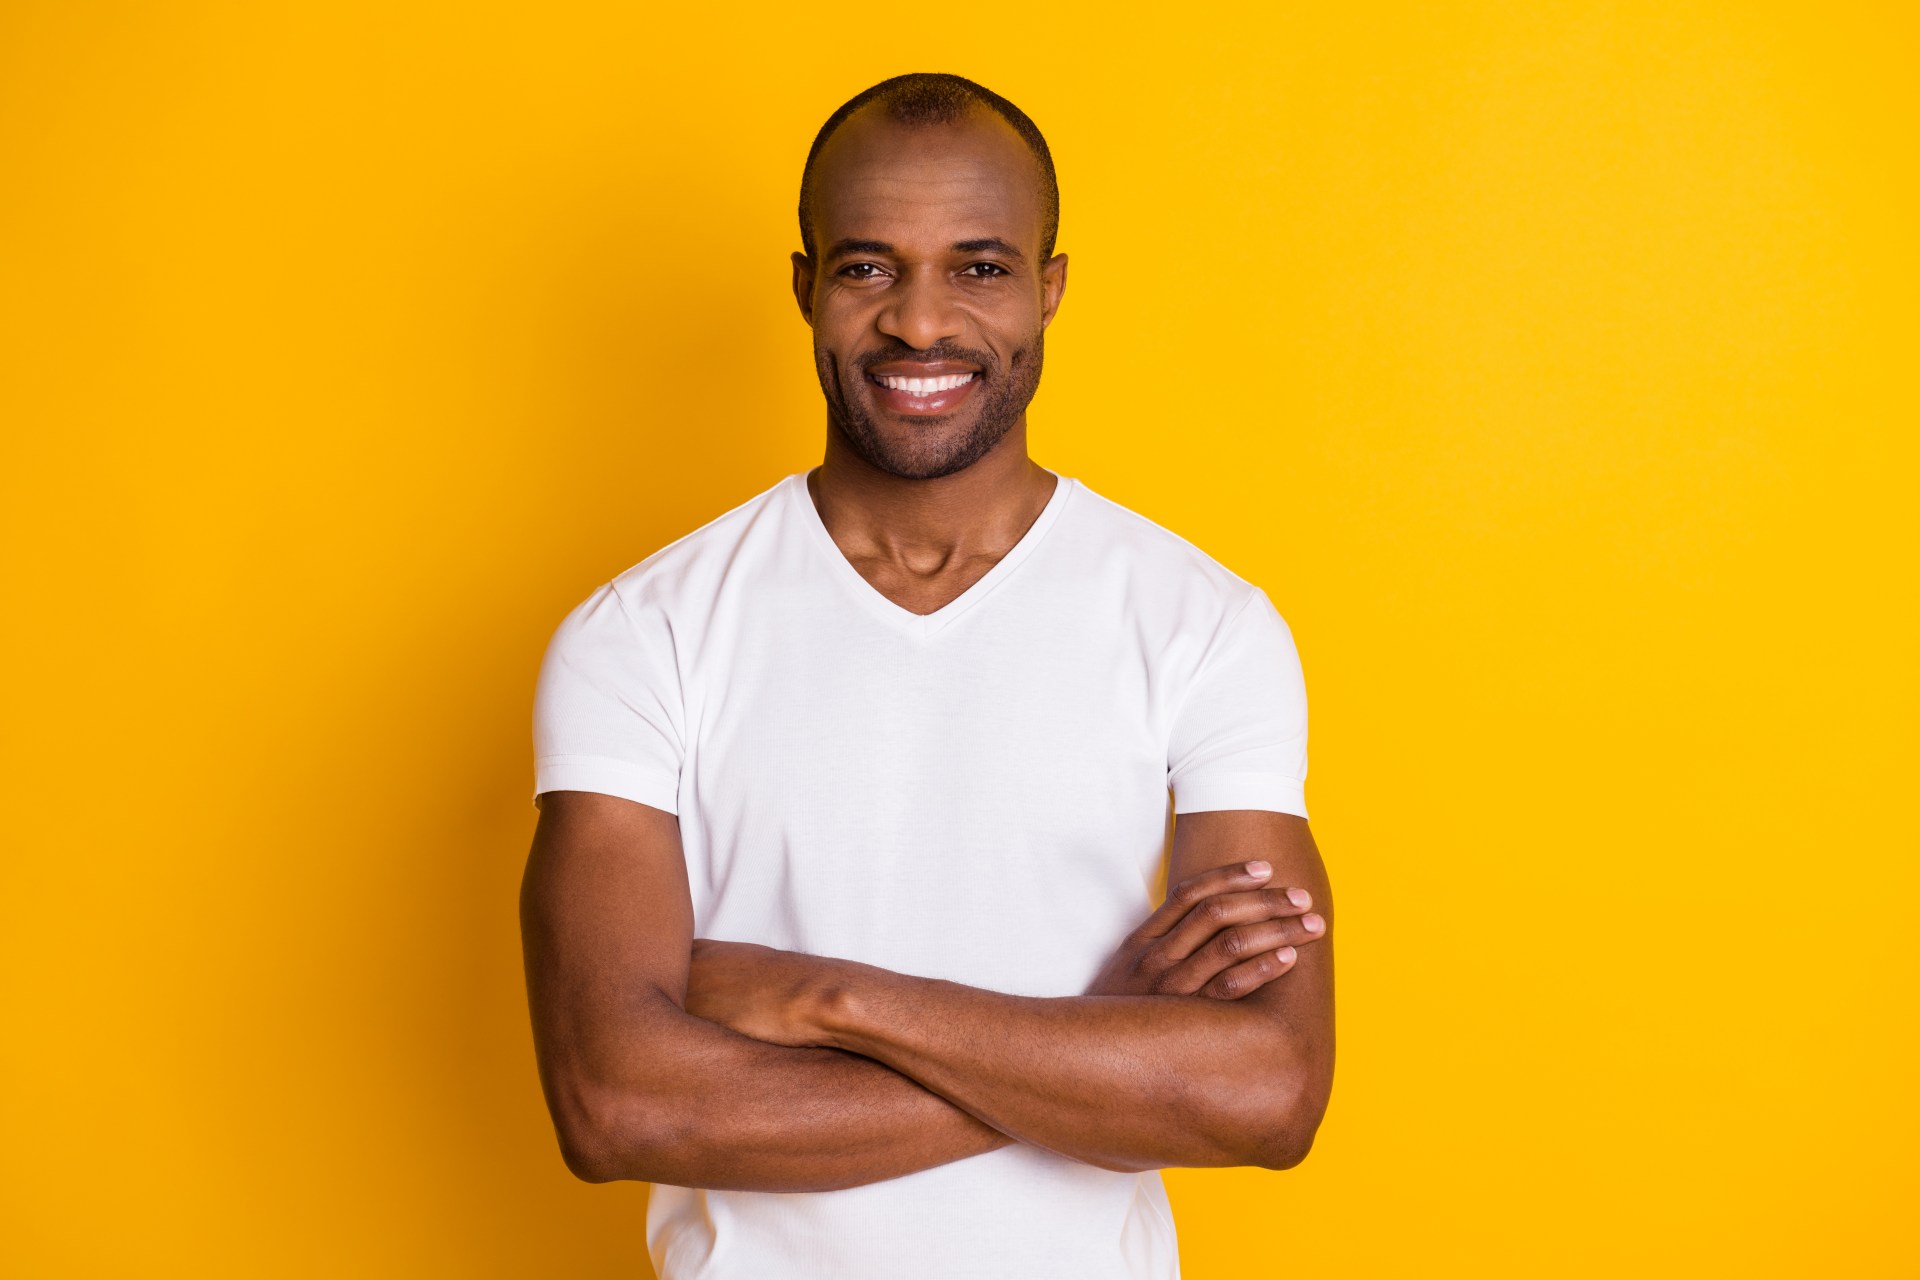 Handsome Black man smiling with white teeth